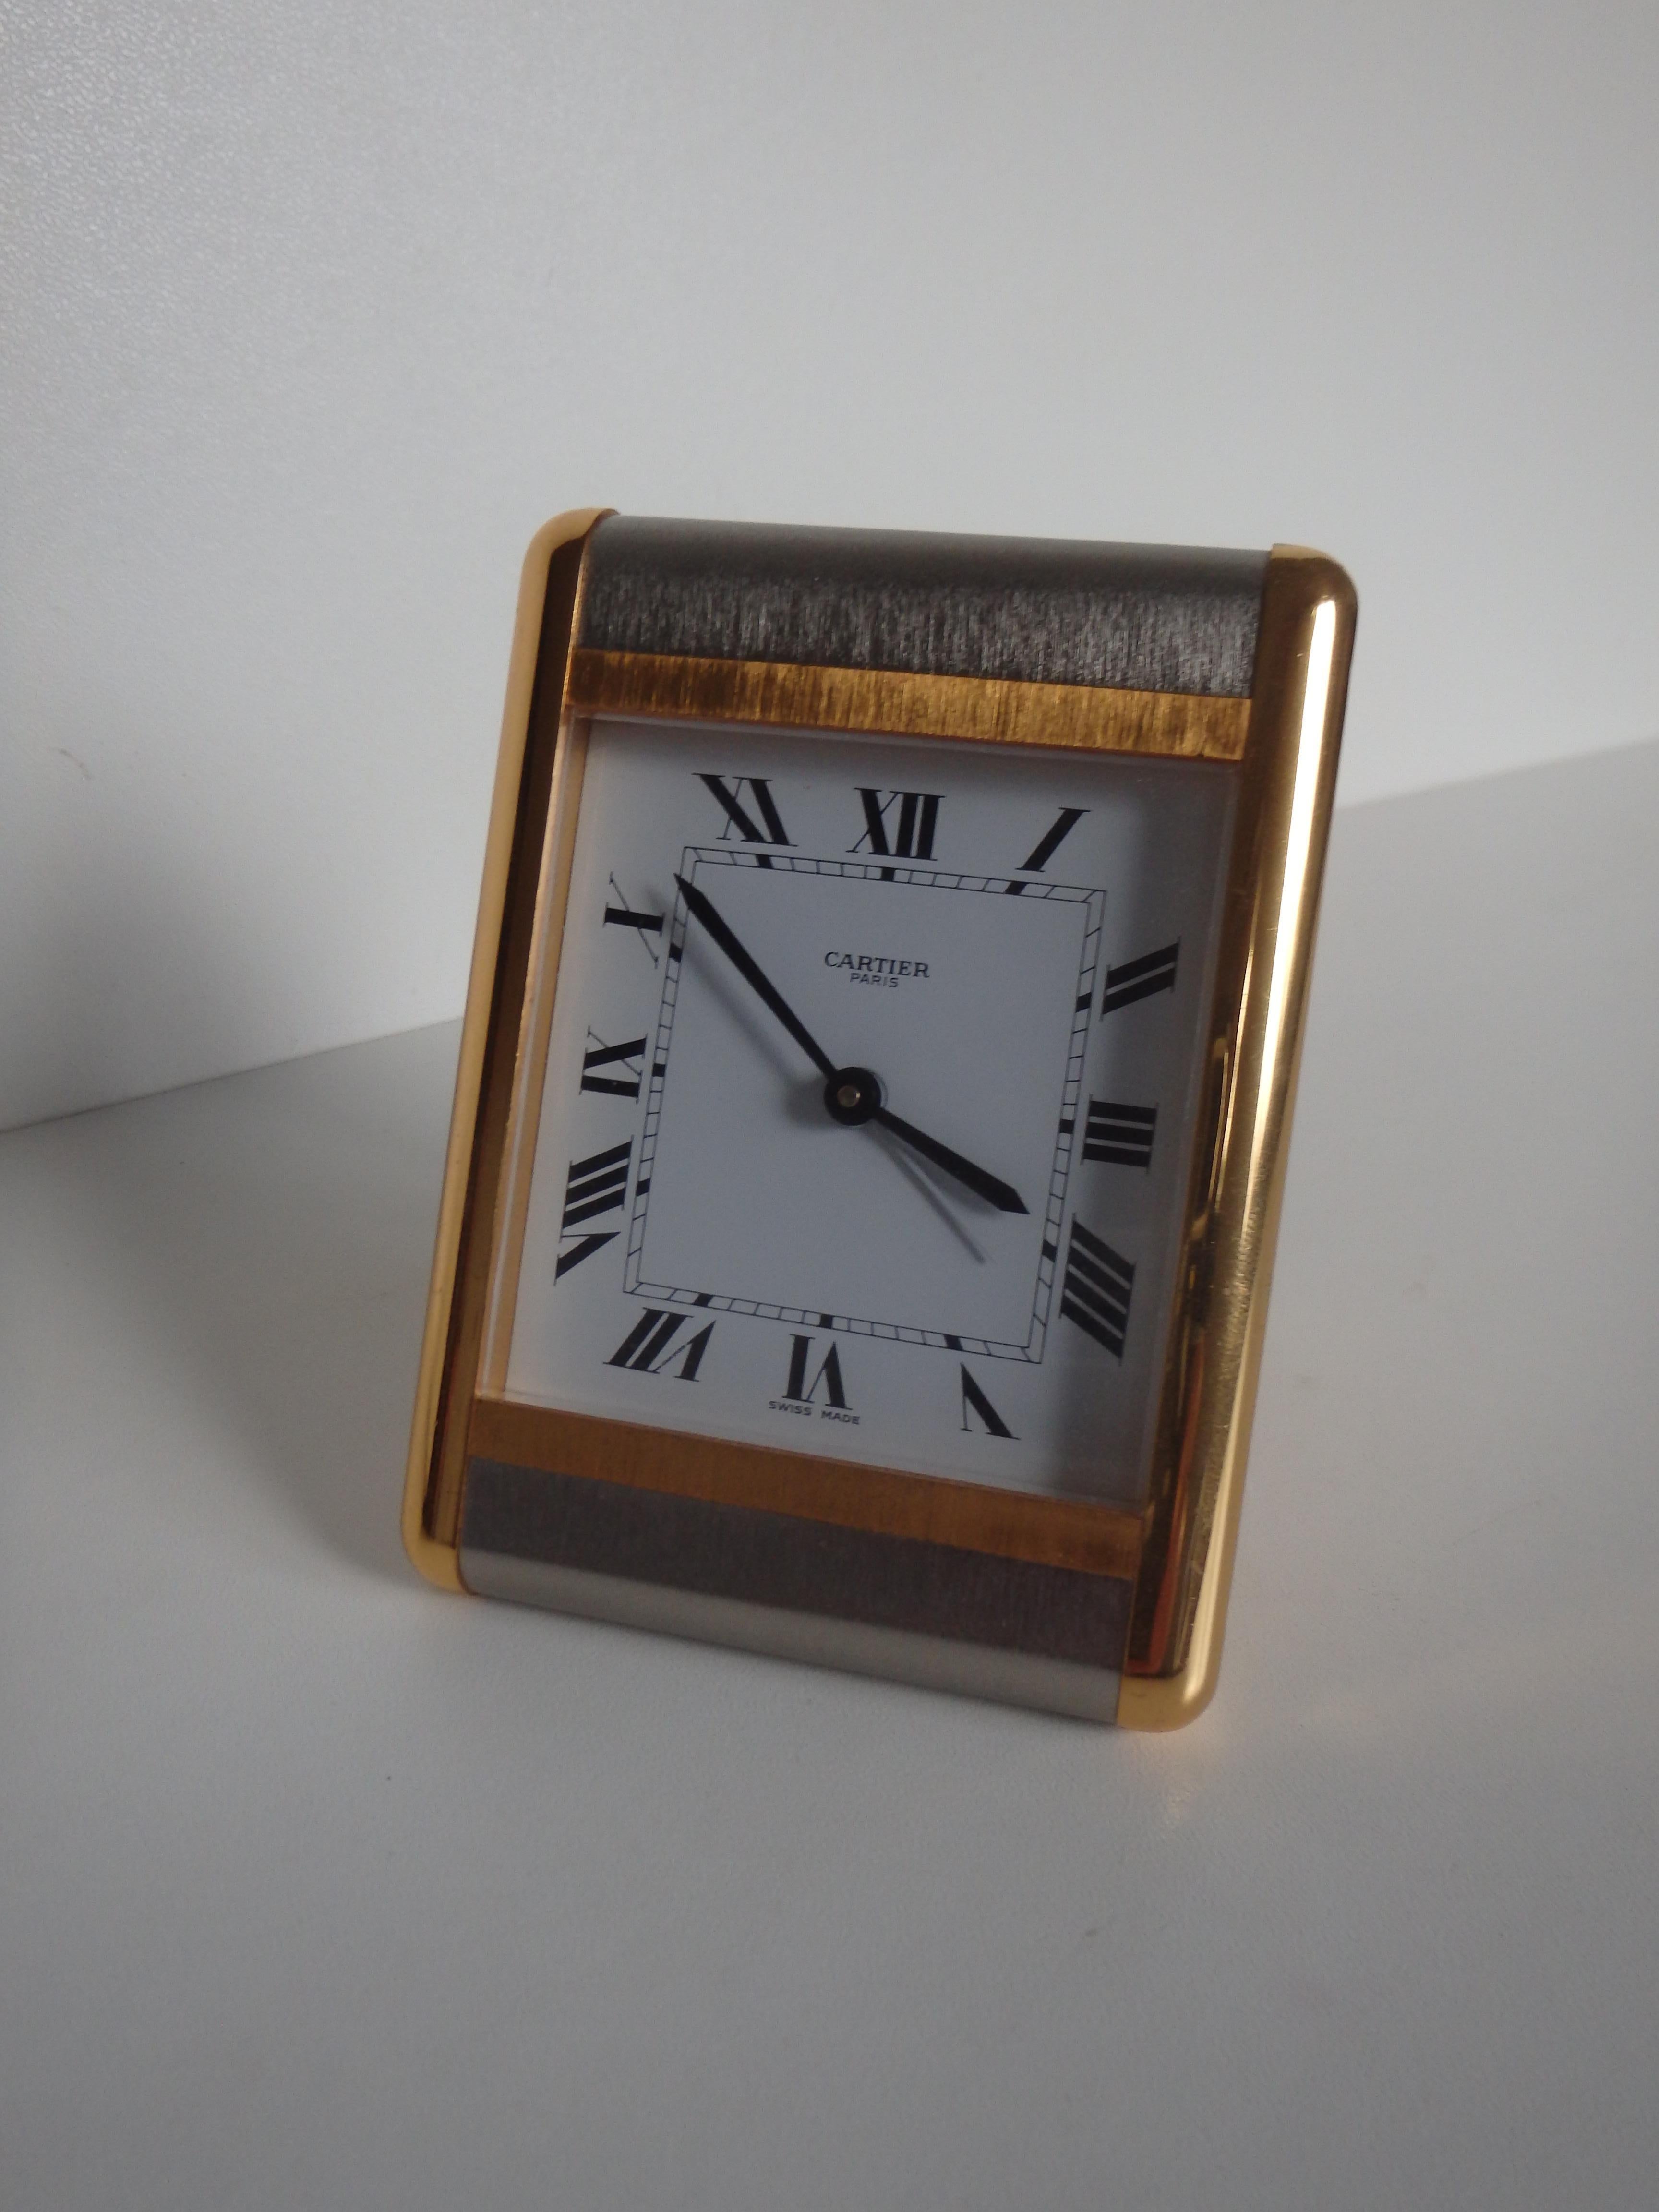 1980this CARTIER Tank table clock with poach the clock is working, but the alarm is not working.